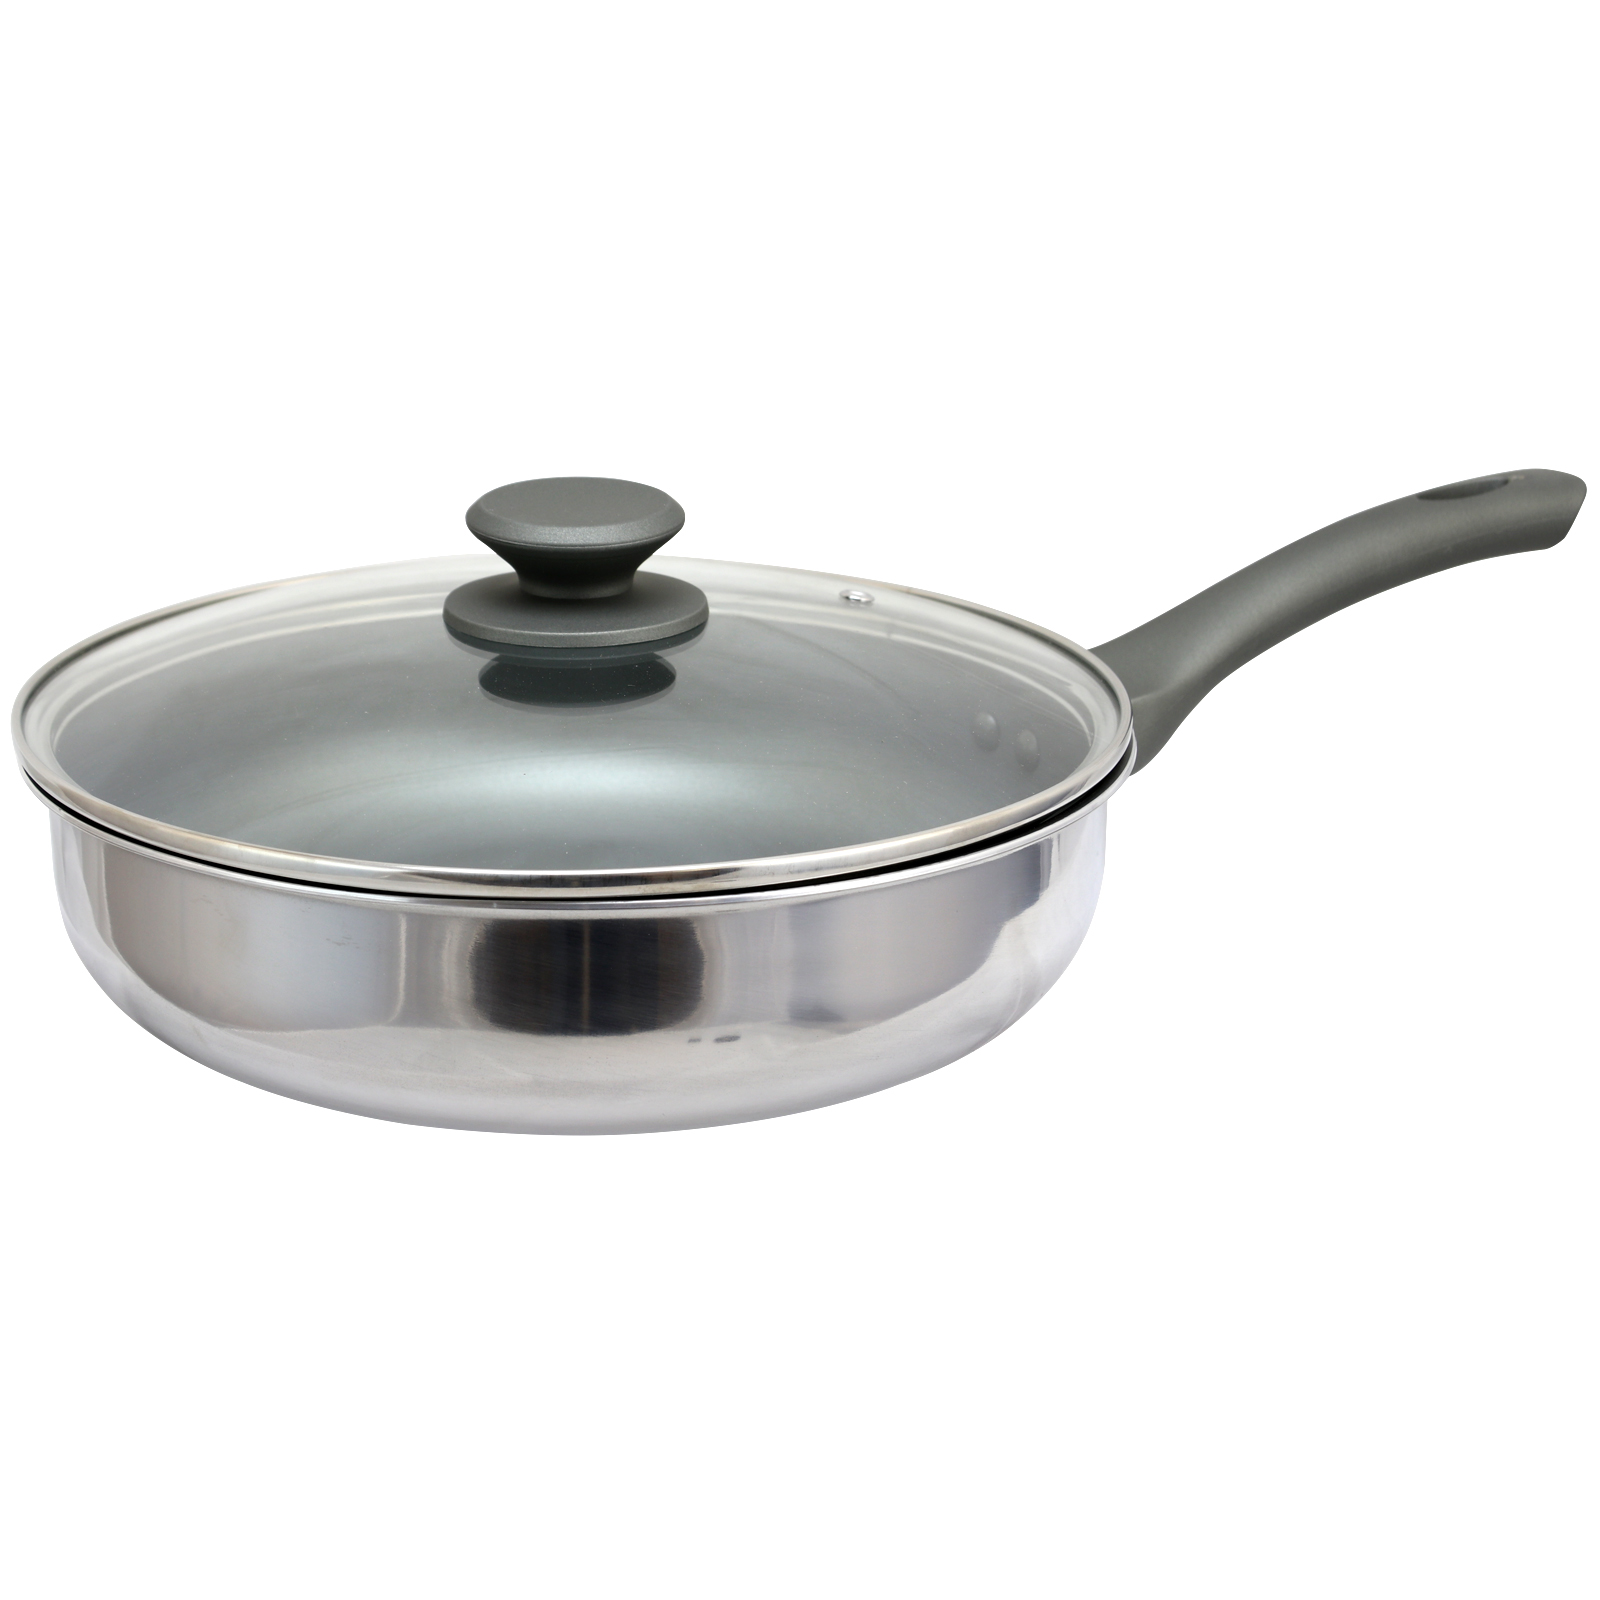 Oster Cuisine Rivendell 3.5 Quart Saute&#169; Pan with Lid